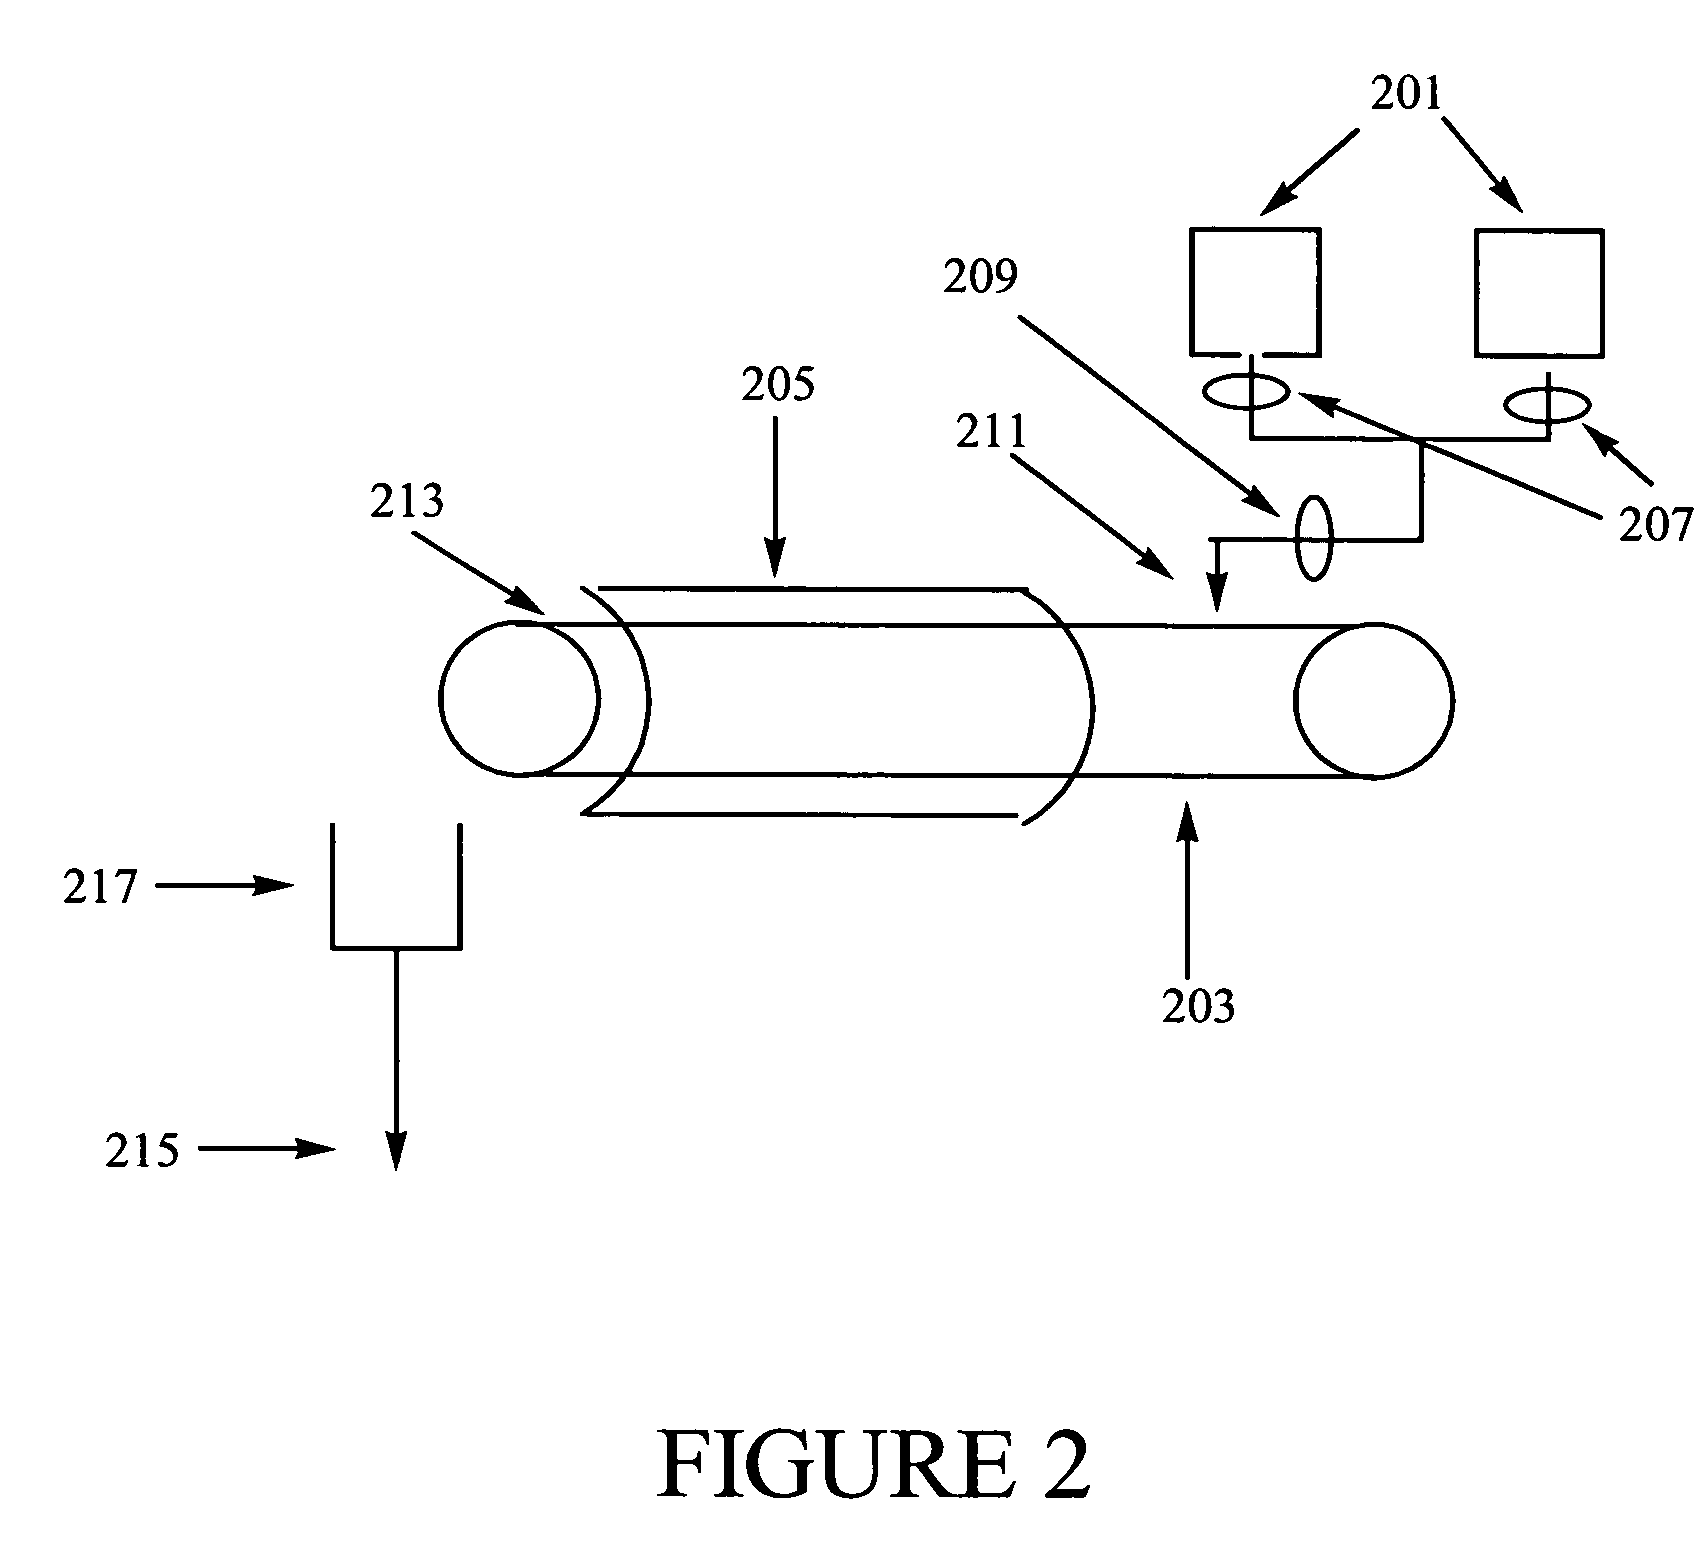 Methods of synthesizing a ferrate oxidant and its use in ballast water